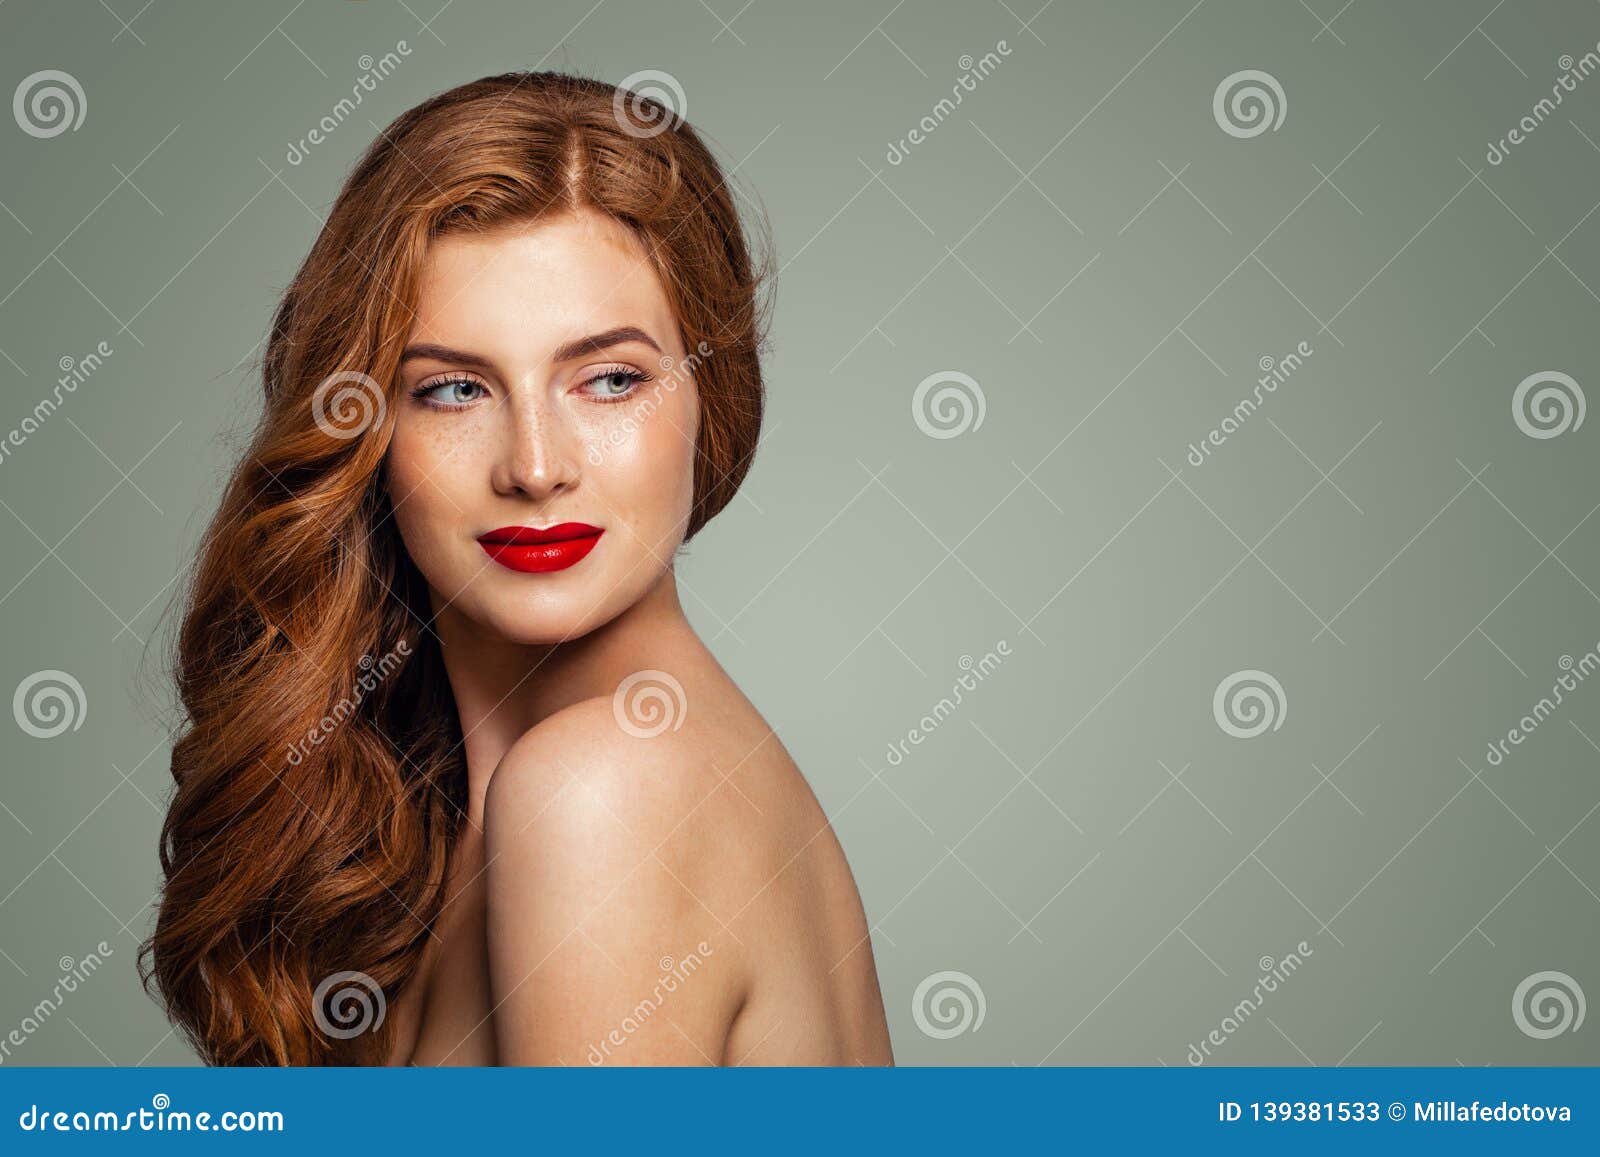 Redhead Woman Smiling Red Head Girl With Curly Hairstyle